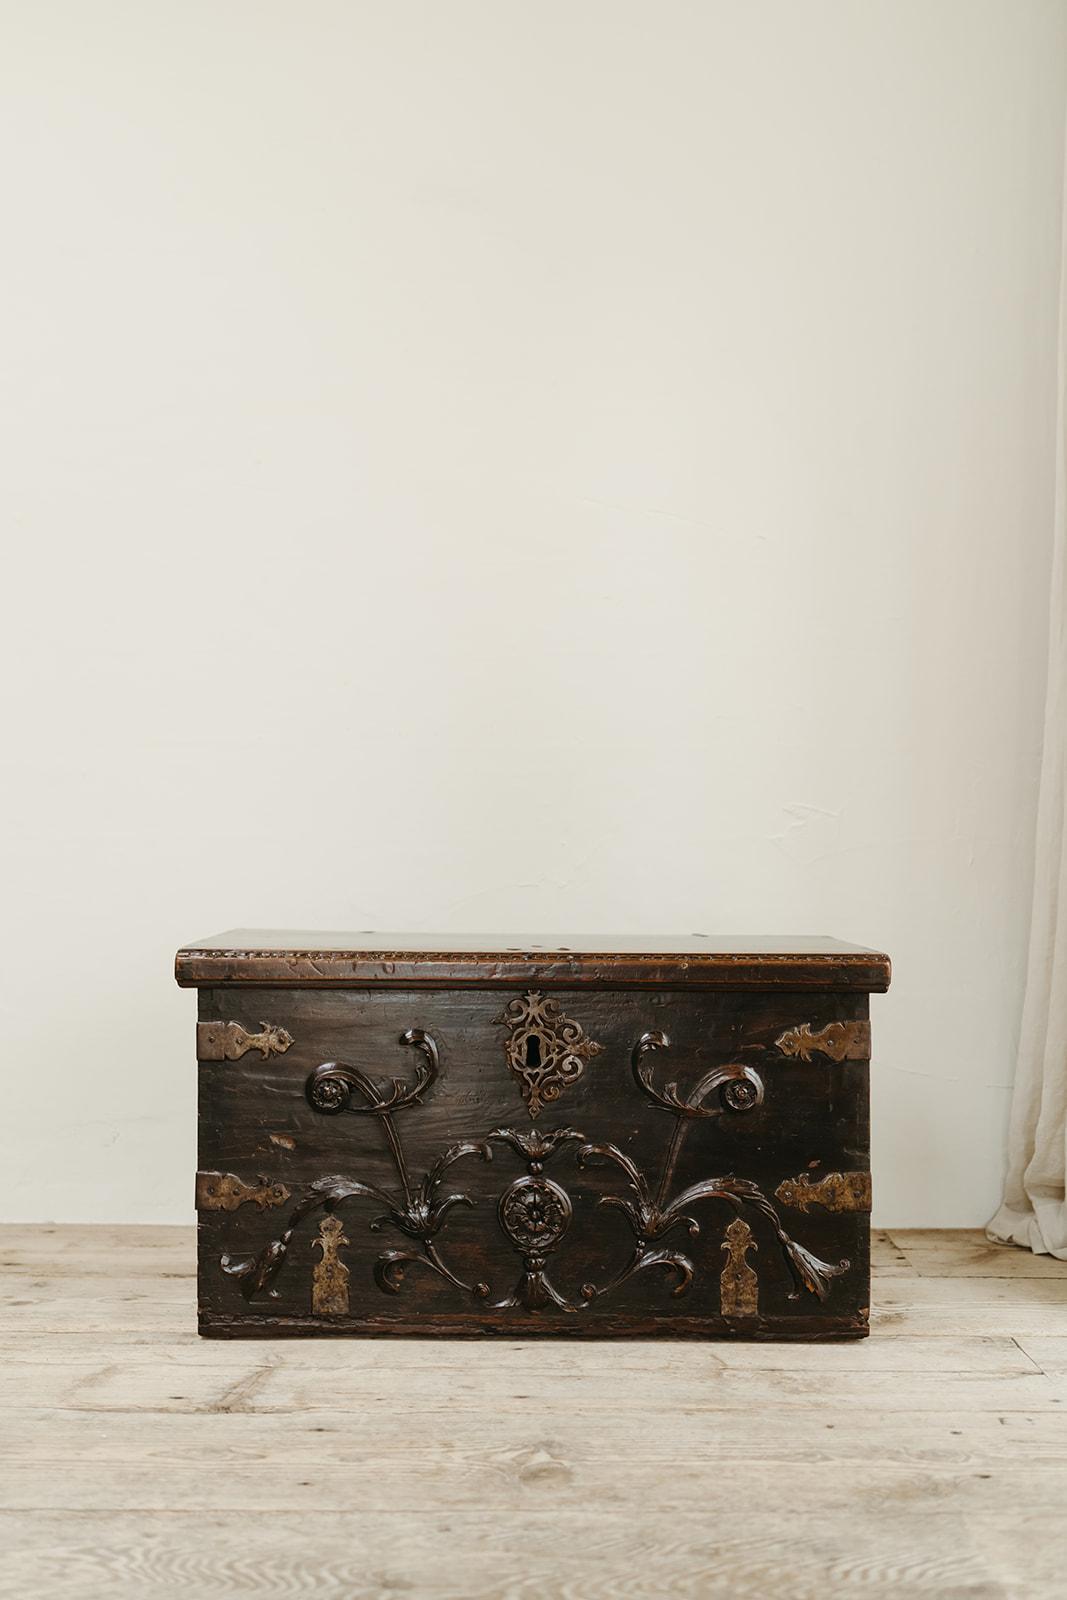 a wonderful patina on this mid 18th century wooden chest ... these pieces have become rare finds ... love them in either a classic interior but also combined with modern pieces ... 